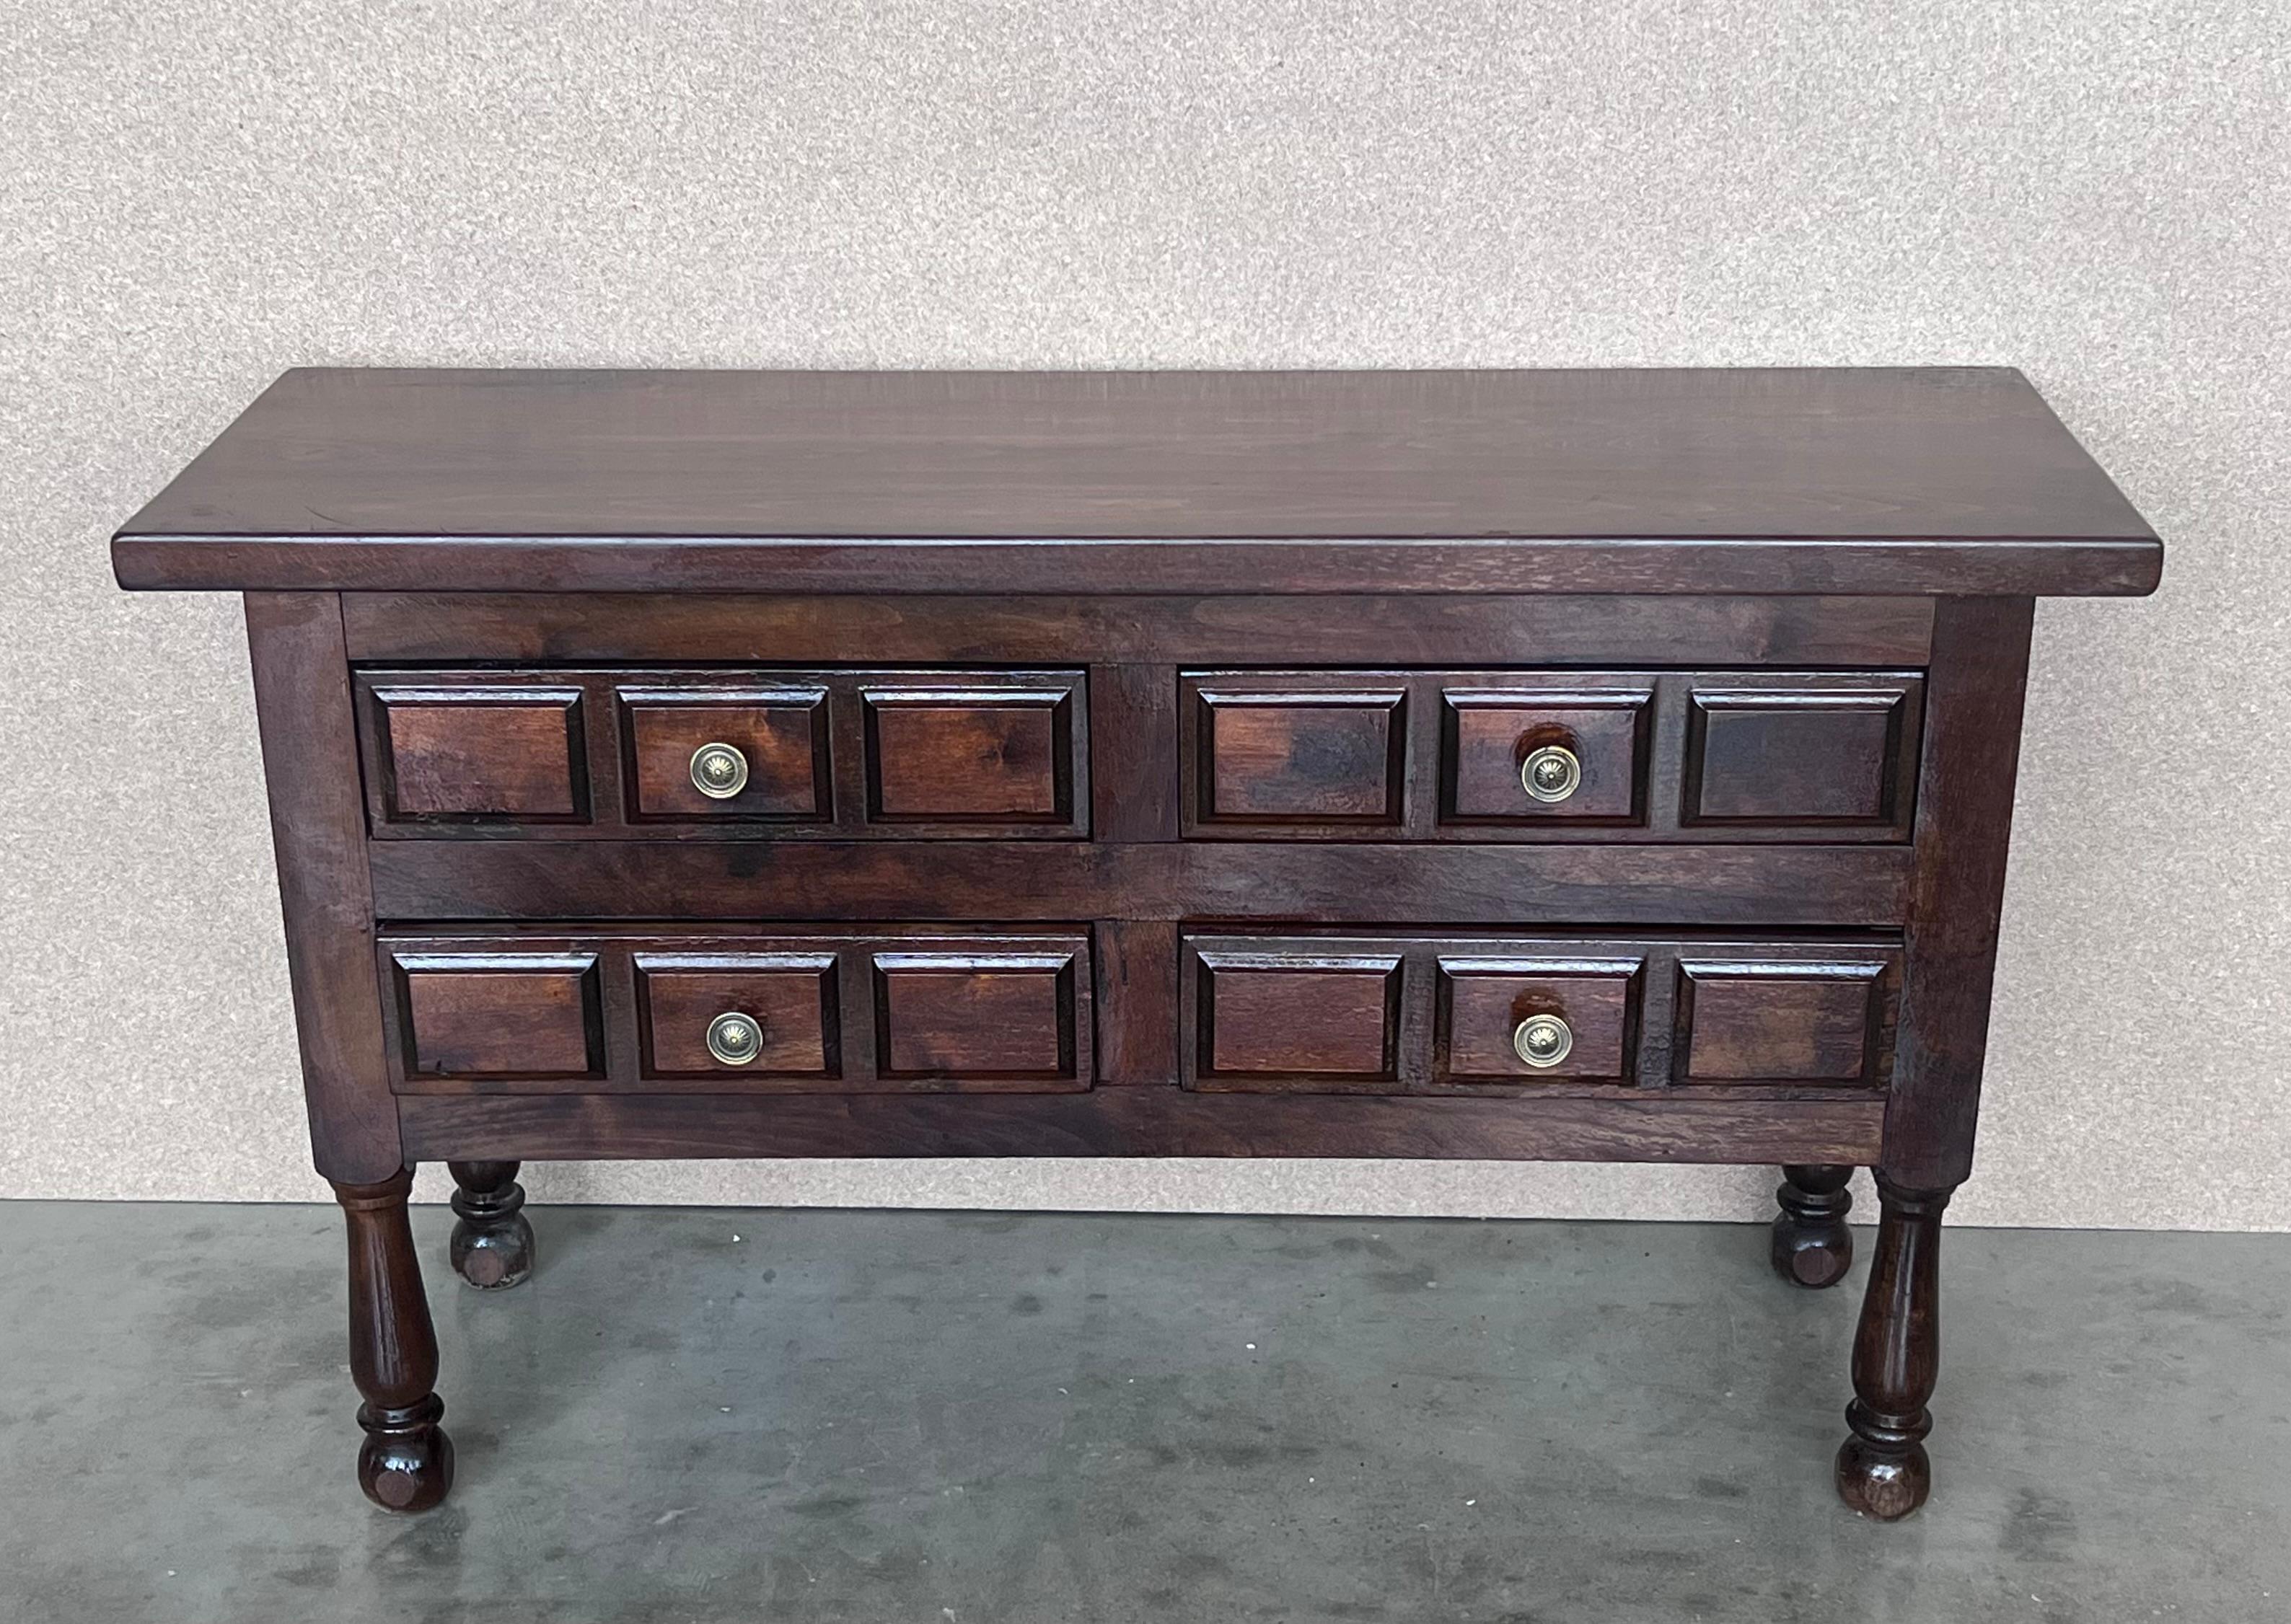 Spanish Colonial Pair of Spanish Large Nightstands or Chest of Drawers in Dark Walnut